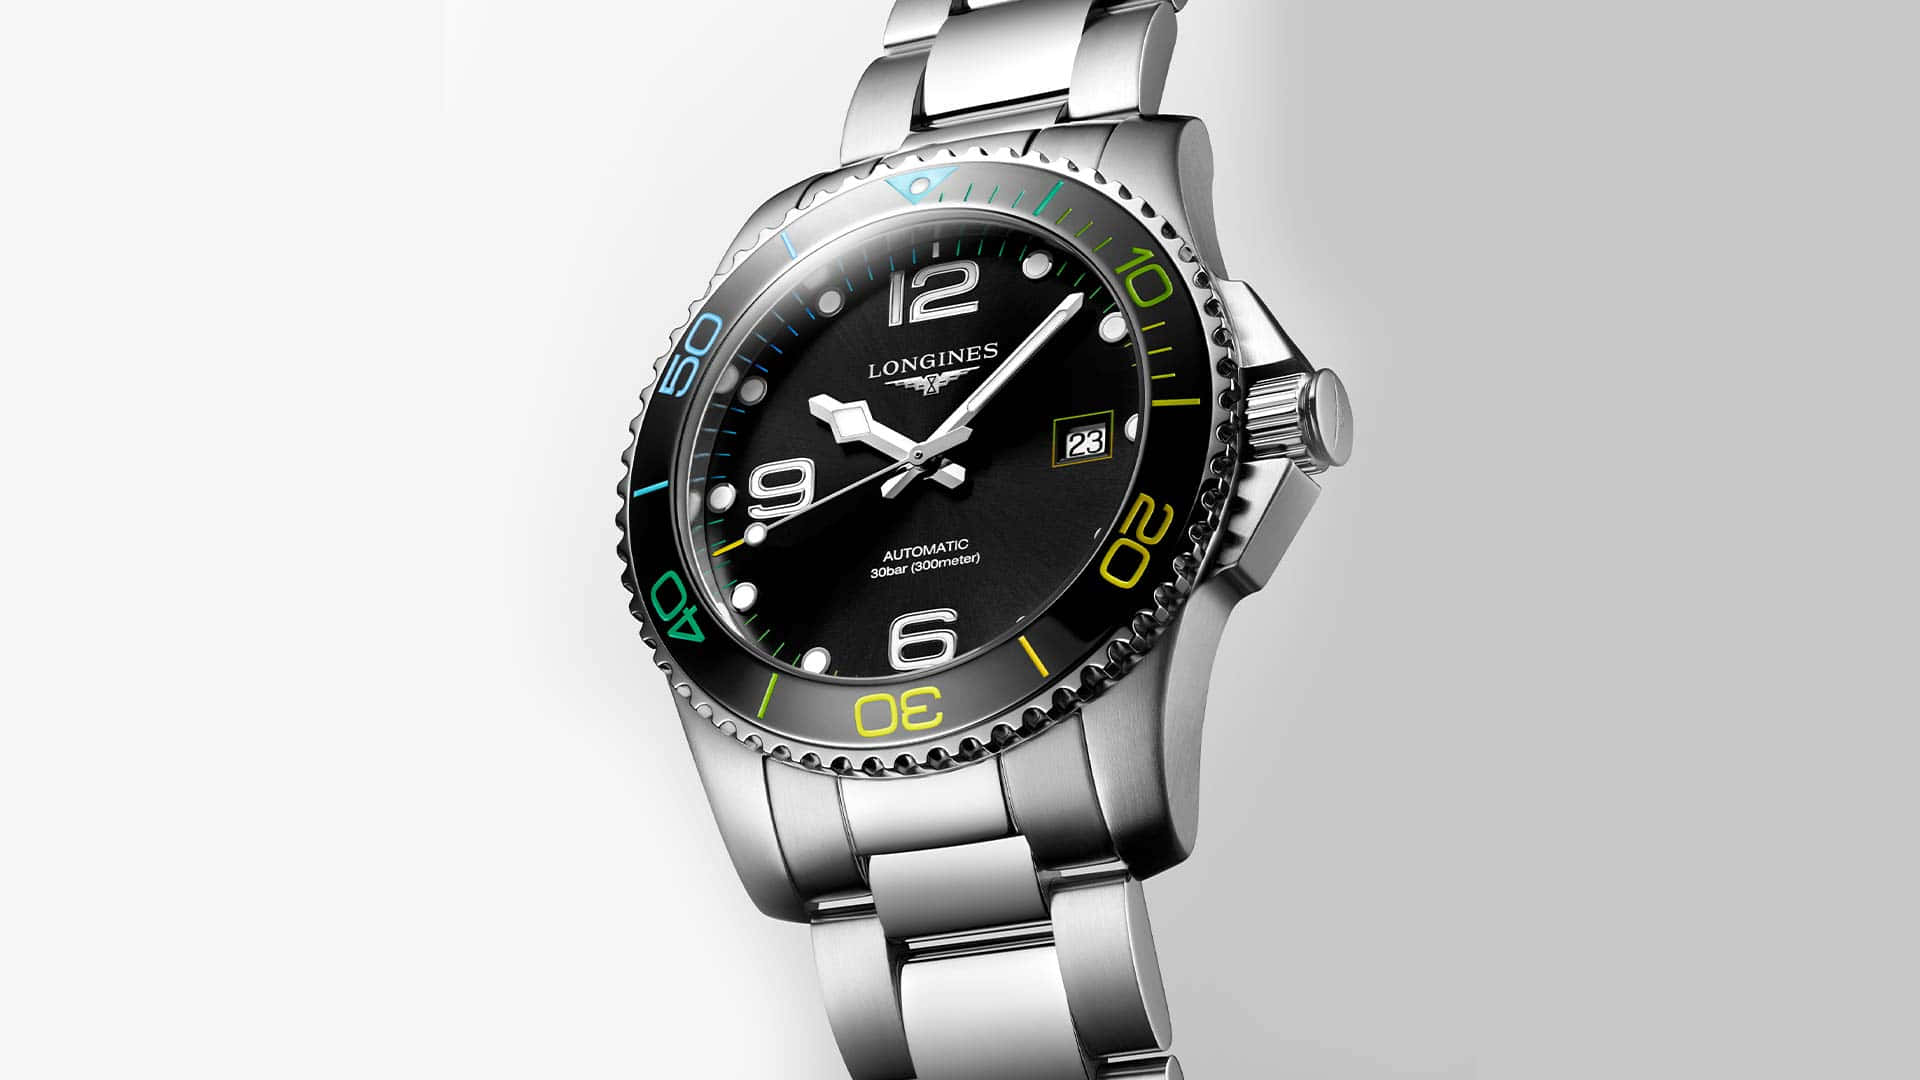 Caption: An Elegant Longines Silver Watch with Colored Bezel Wallpaper